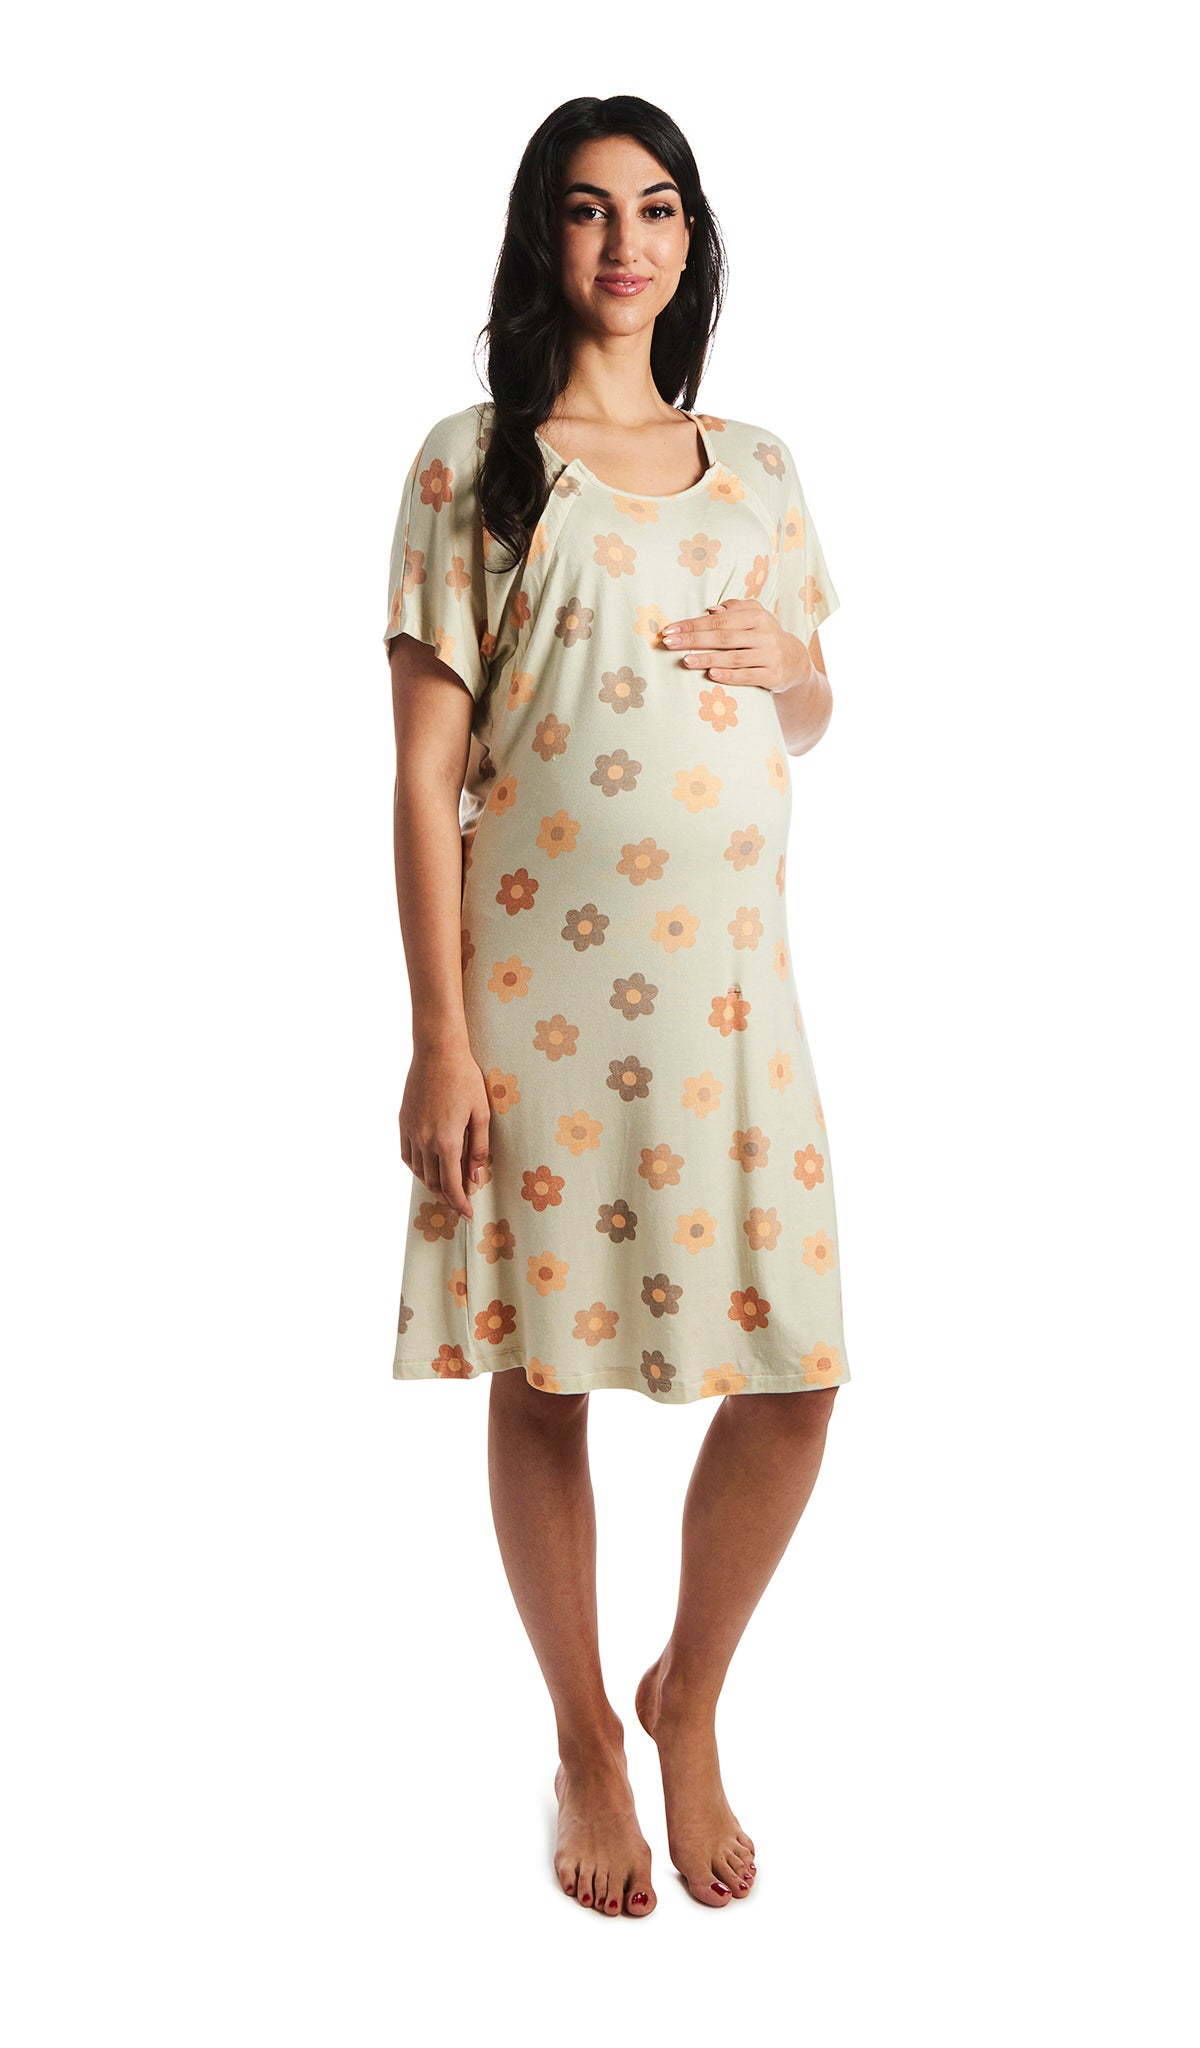 Daisies Rosa hospital gown. Pregnant woman with one hand on belly, wearing hospital gown with scoop-neckline featuring dual snap openings. 